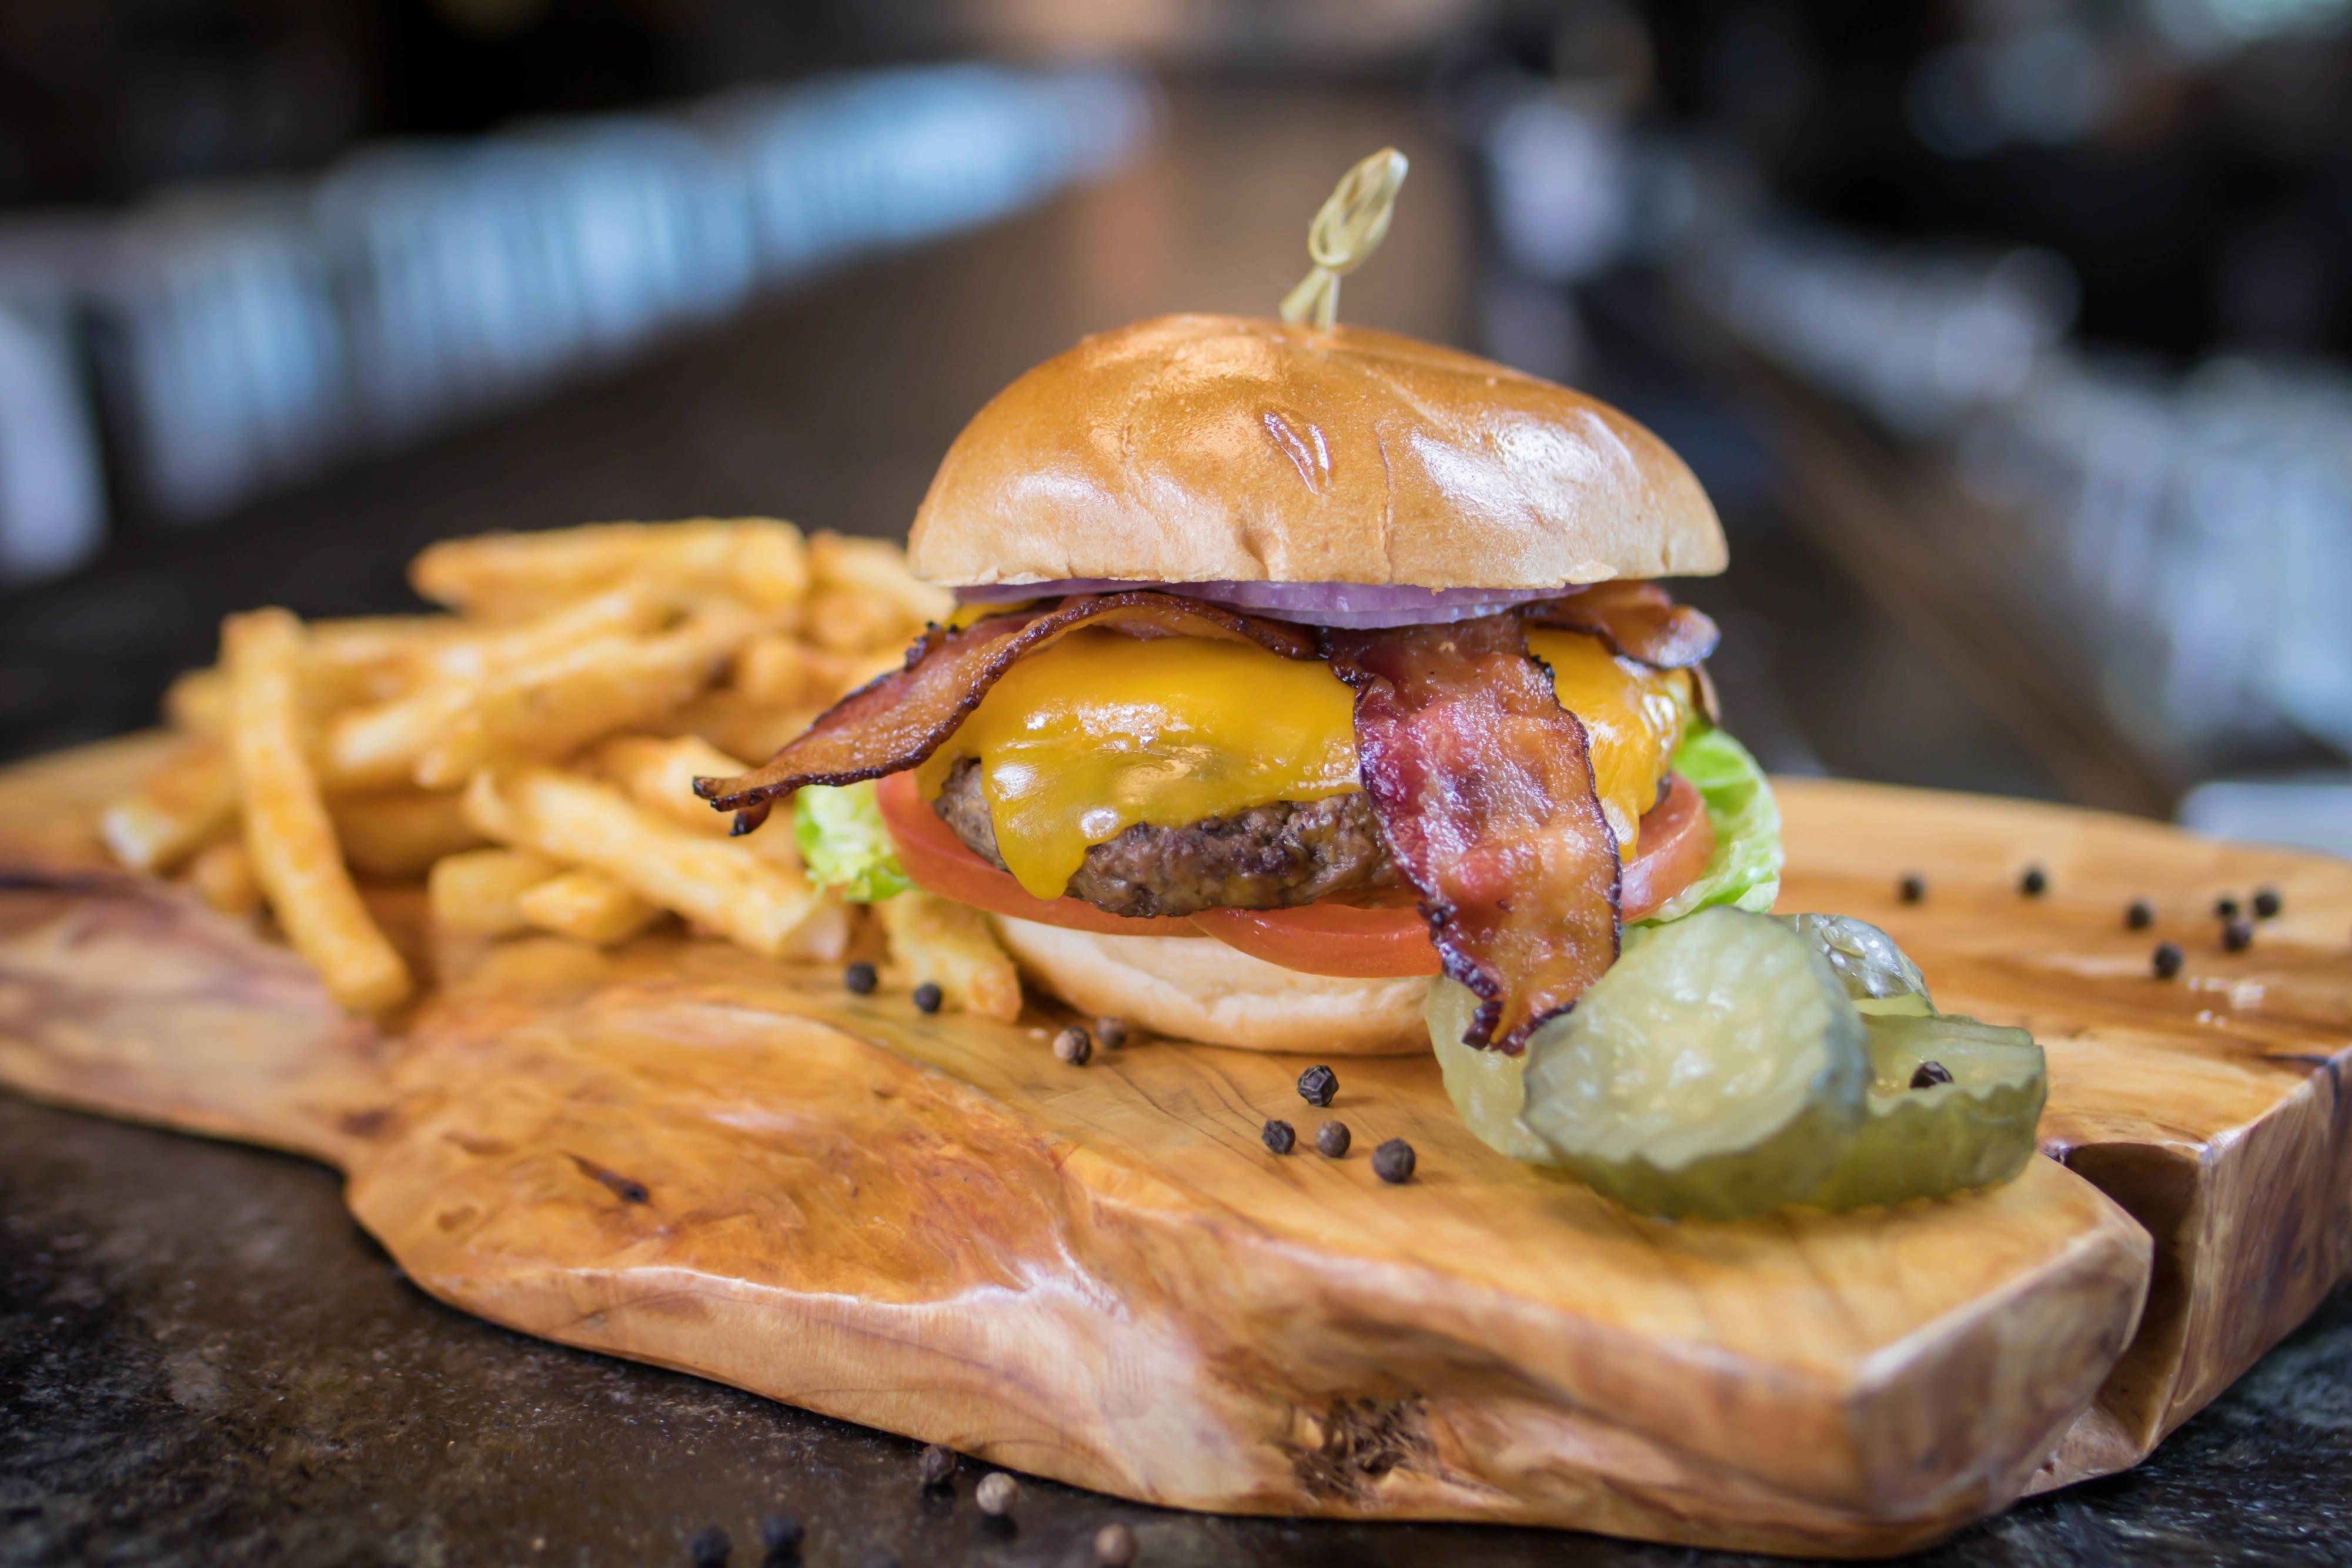 Arapahoe Springs Bar & Grill - Burger and Fries